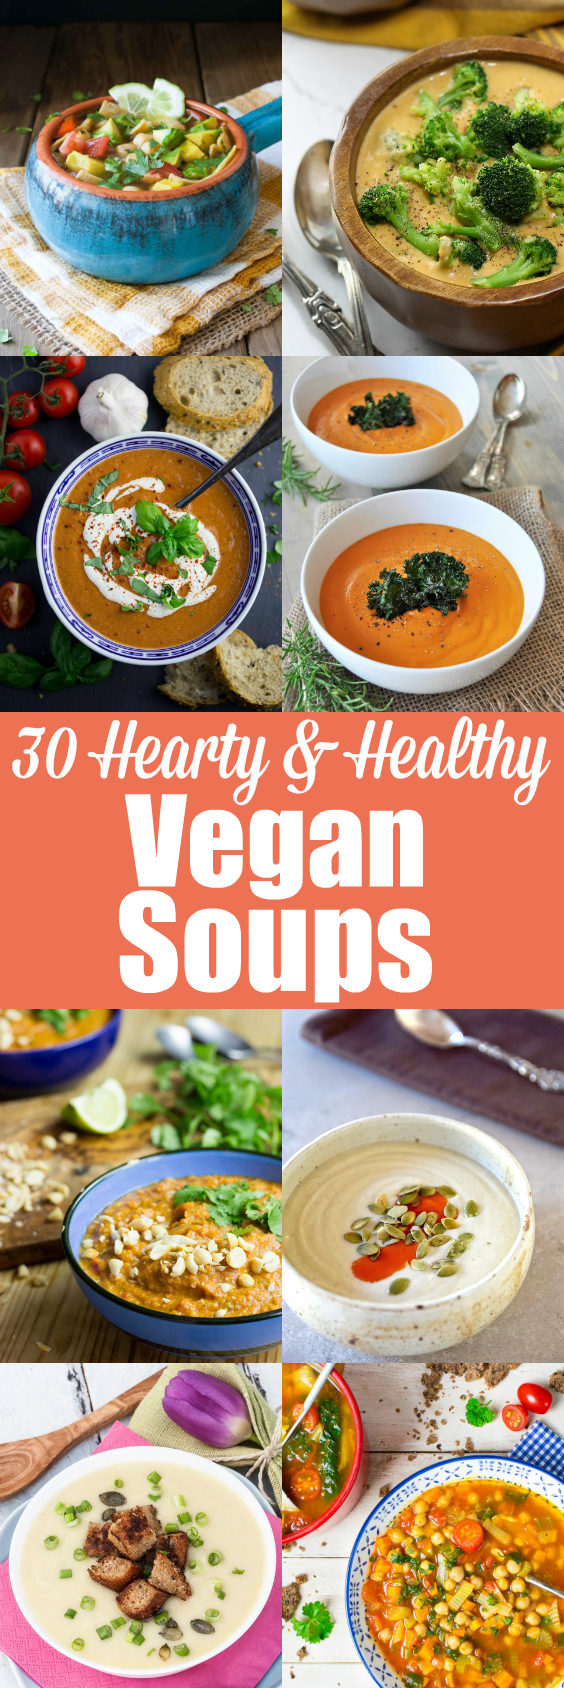 If you’re looking for delicious and filling vegan soups and stews, look no further! I teamed up with some of my blogger friends